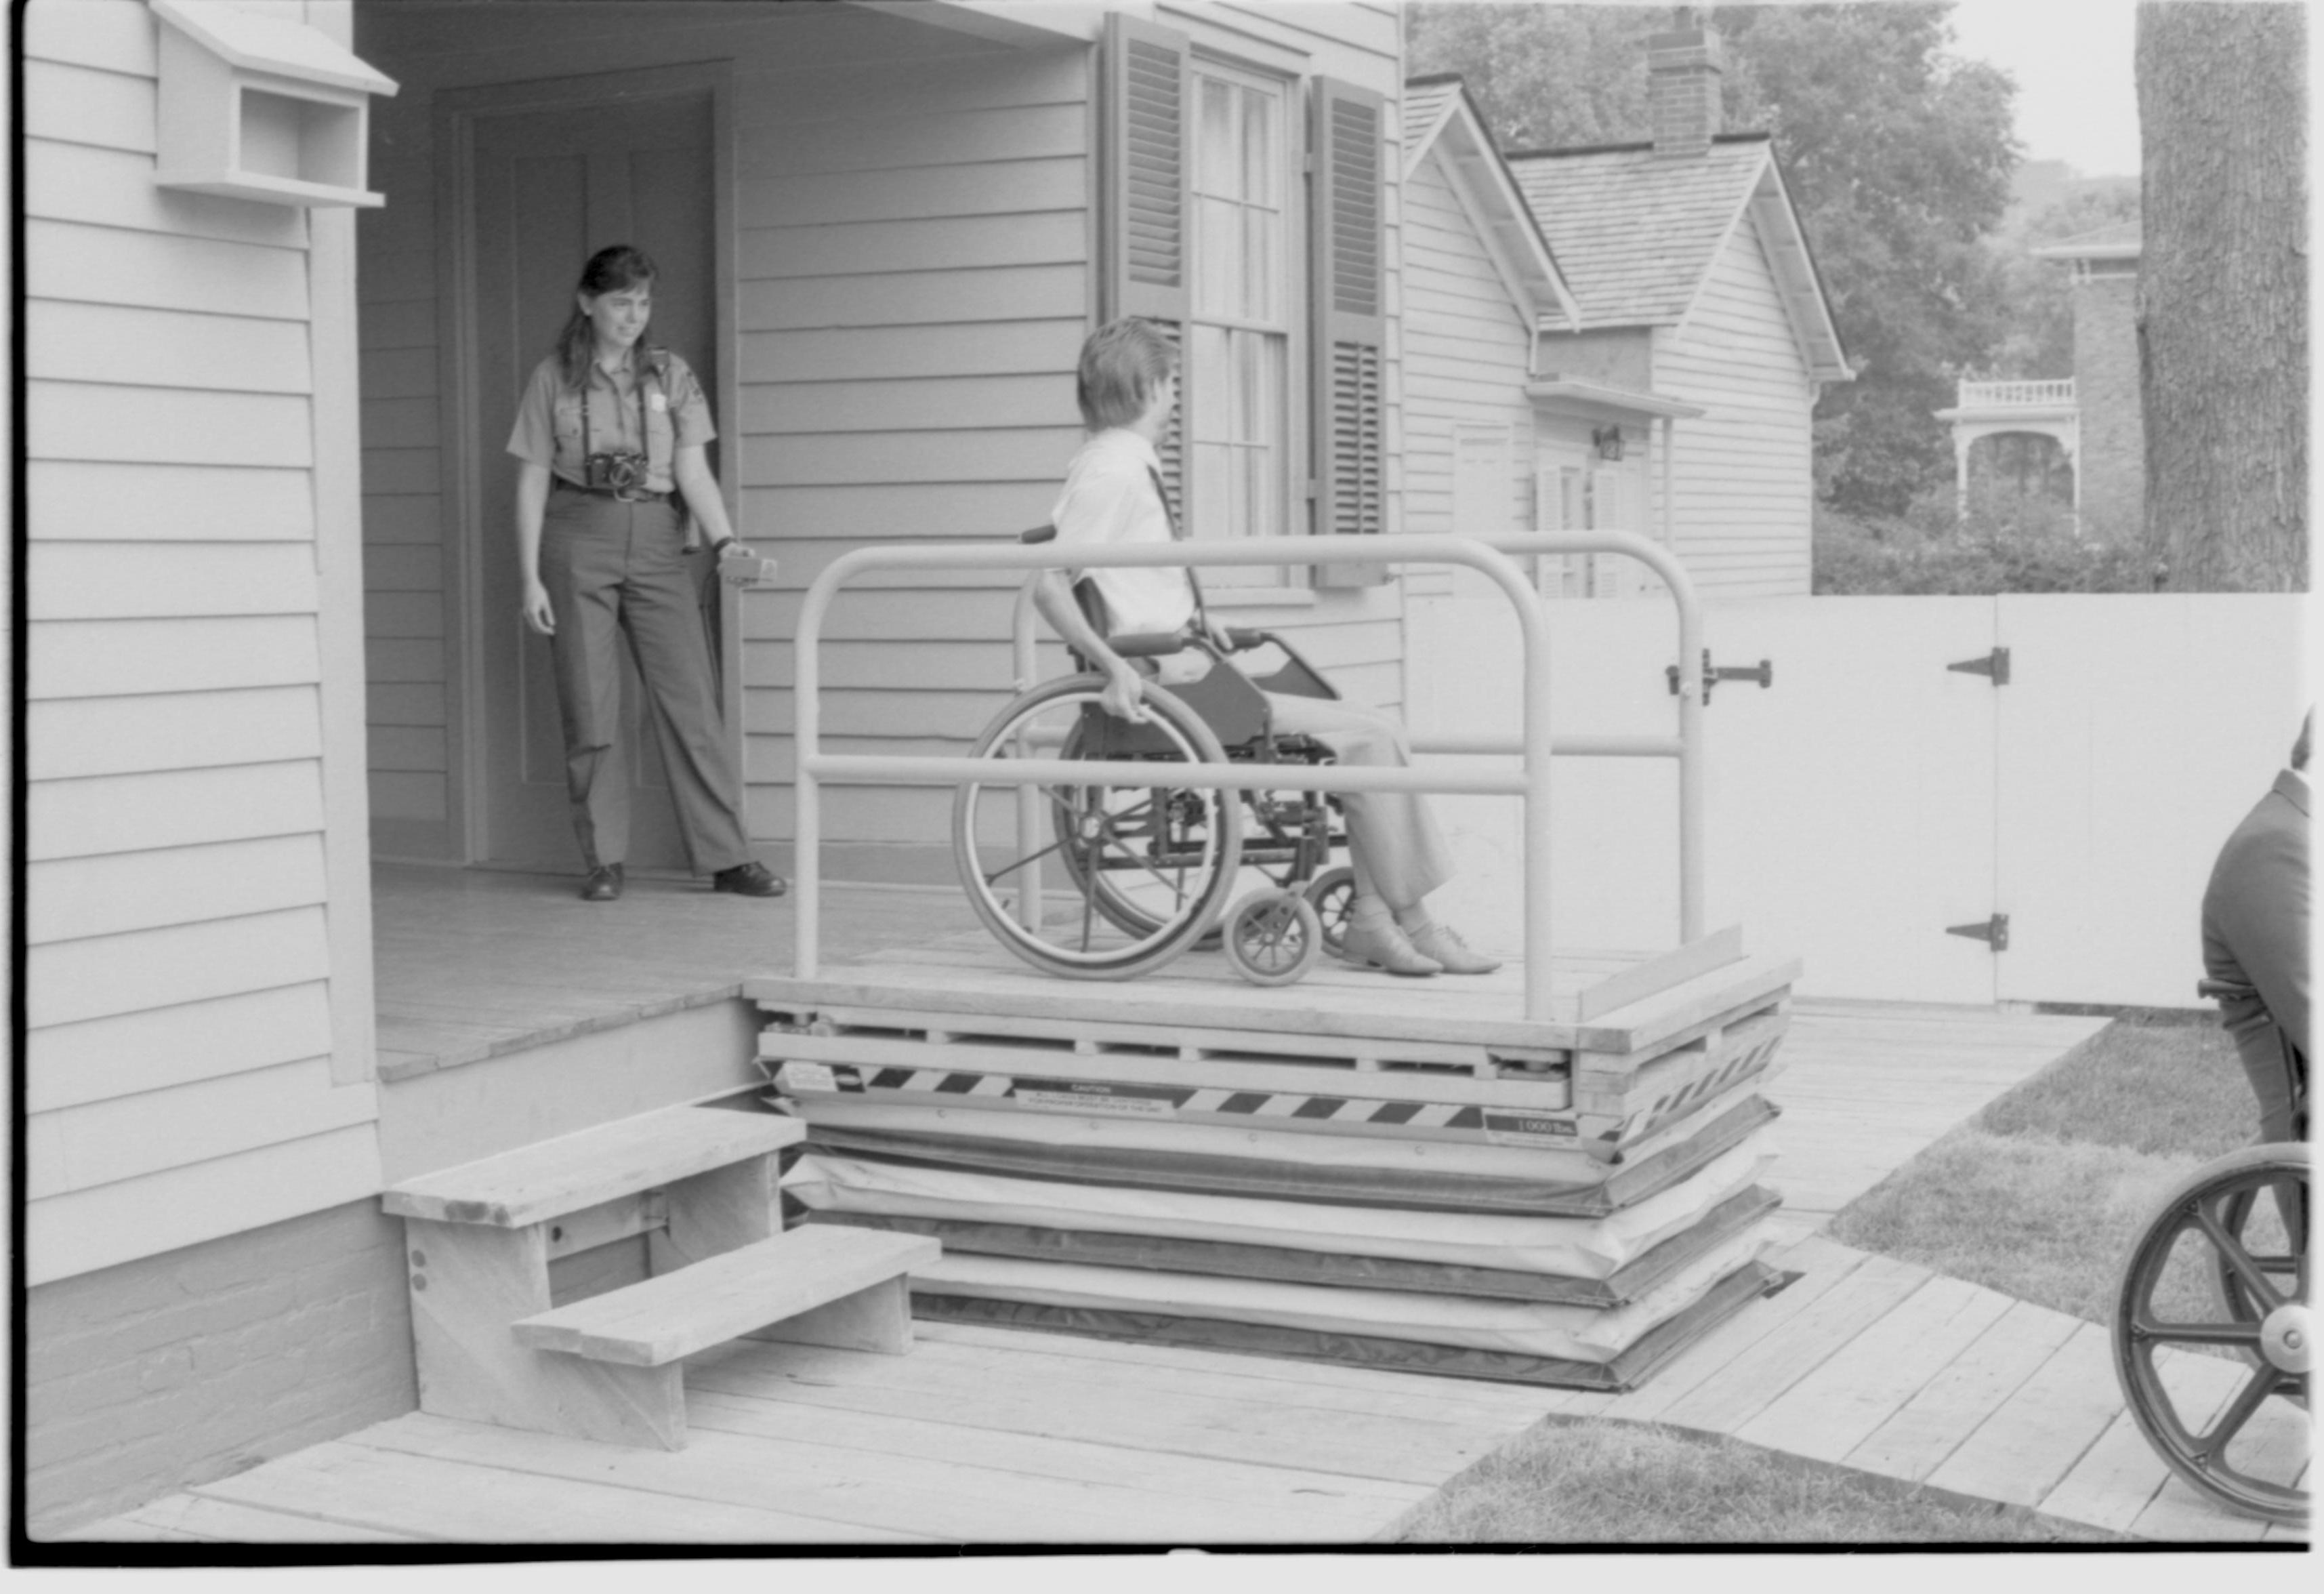 Lincoln Home wheelchair lift fully extended. One man in wheelchair on lift, with one other man in wheelchair to right of picture. Staff member on back porch using lift controls. Corneau house in background. Photographer facing north west.